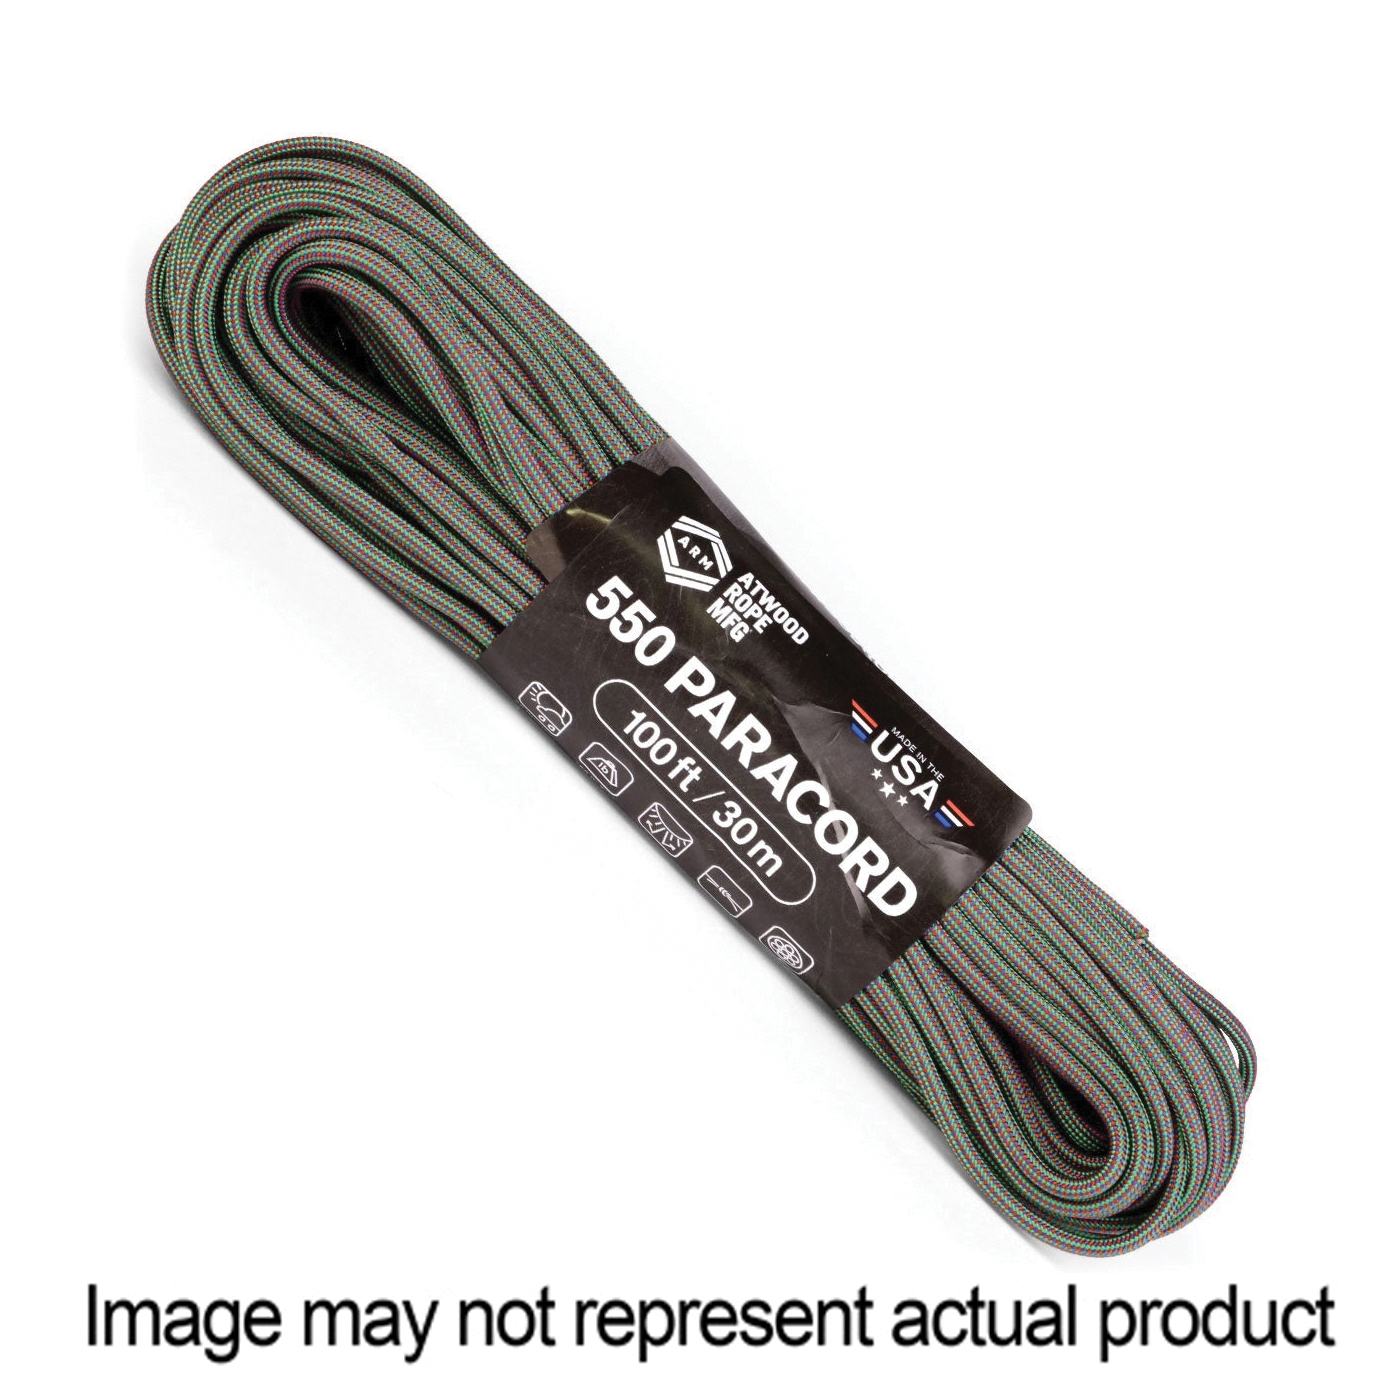 Atwood Rope Mfg CCS01 Paracord, 5/32 in Dia, Chameleon - 1